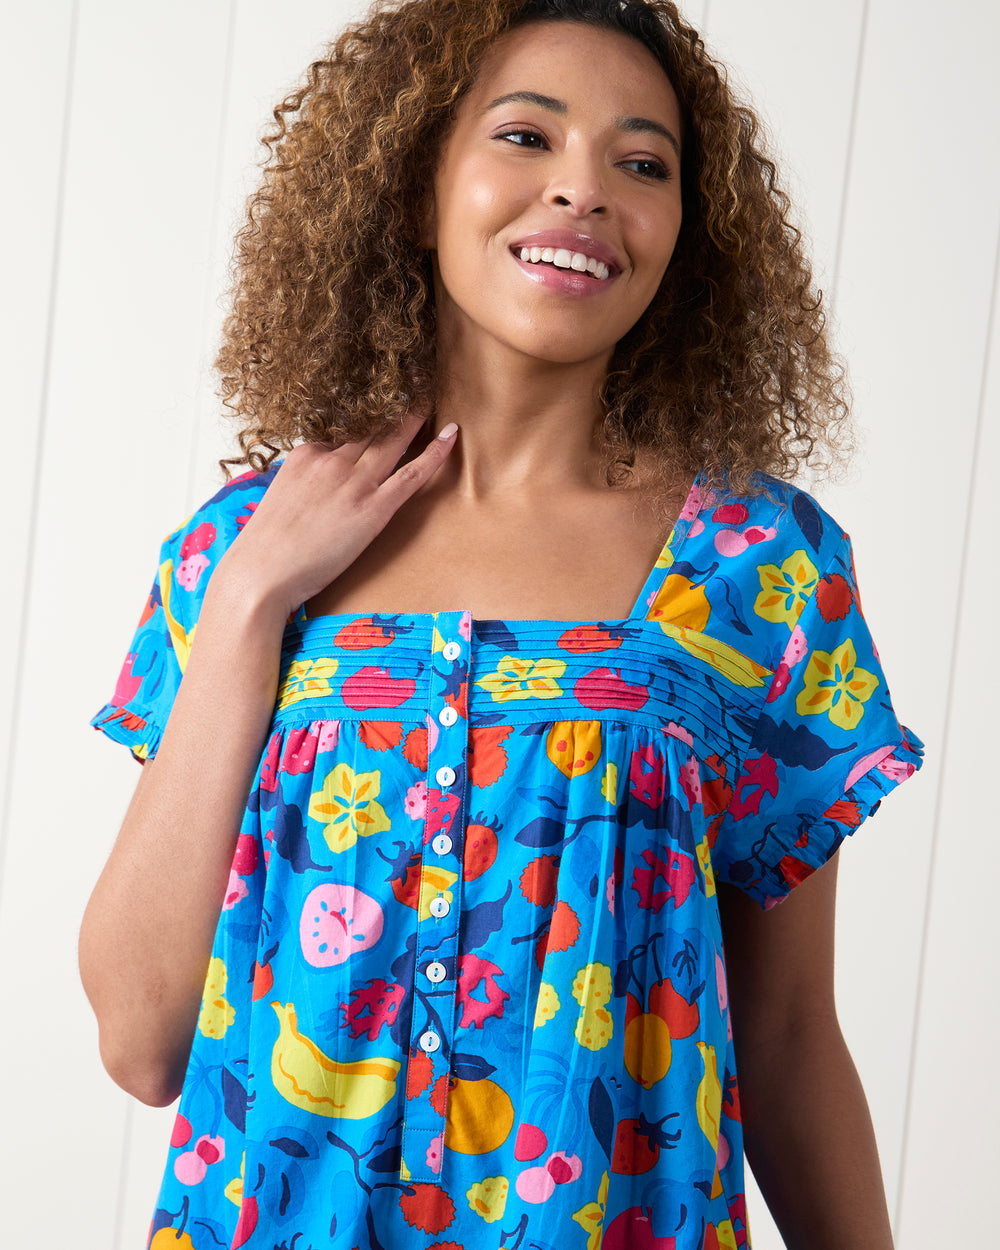 Smoothie Time - Pintuck Nightgown - Tropical Blue - Printfresh